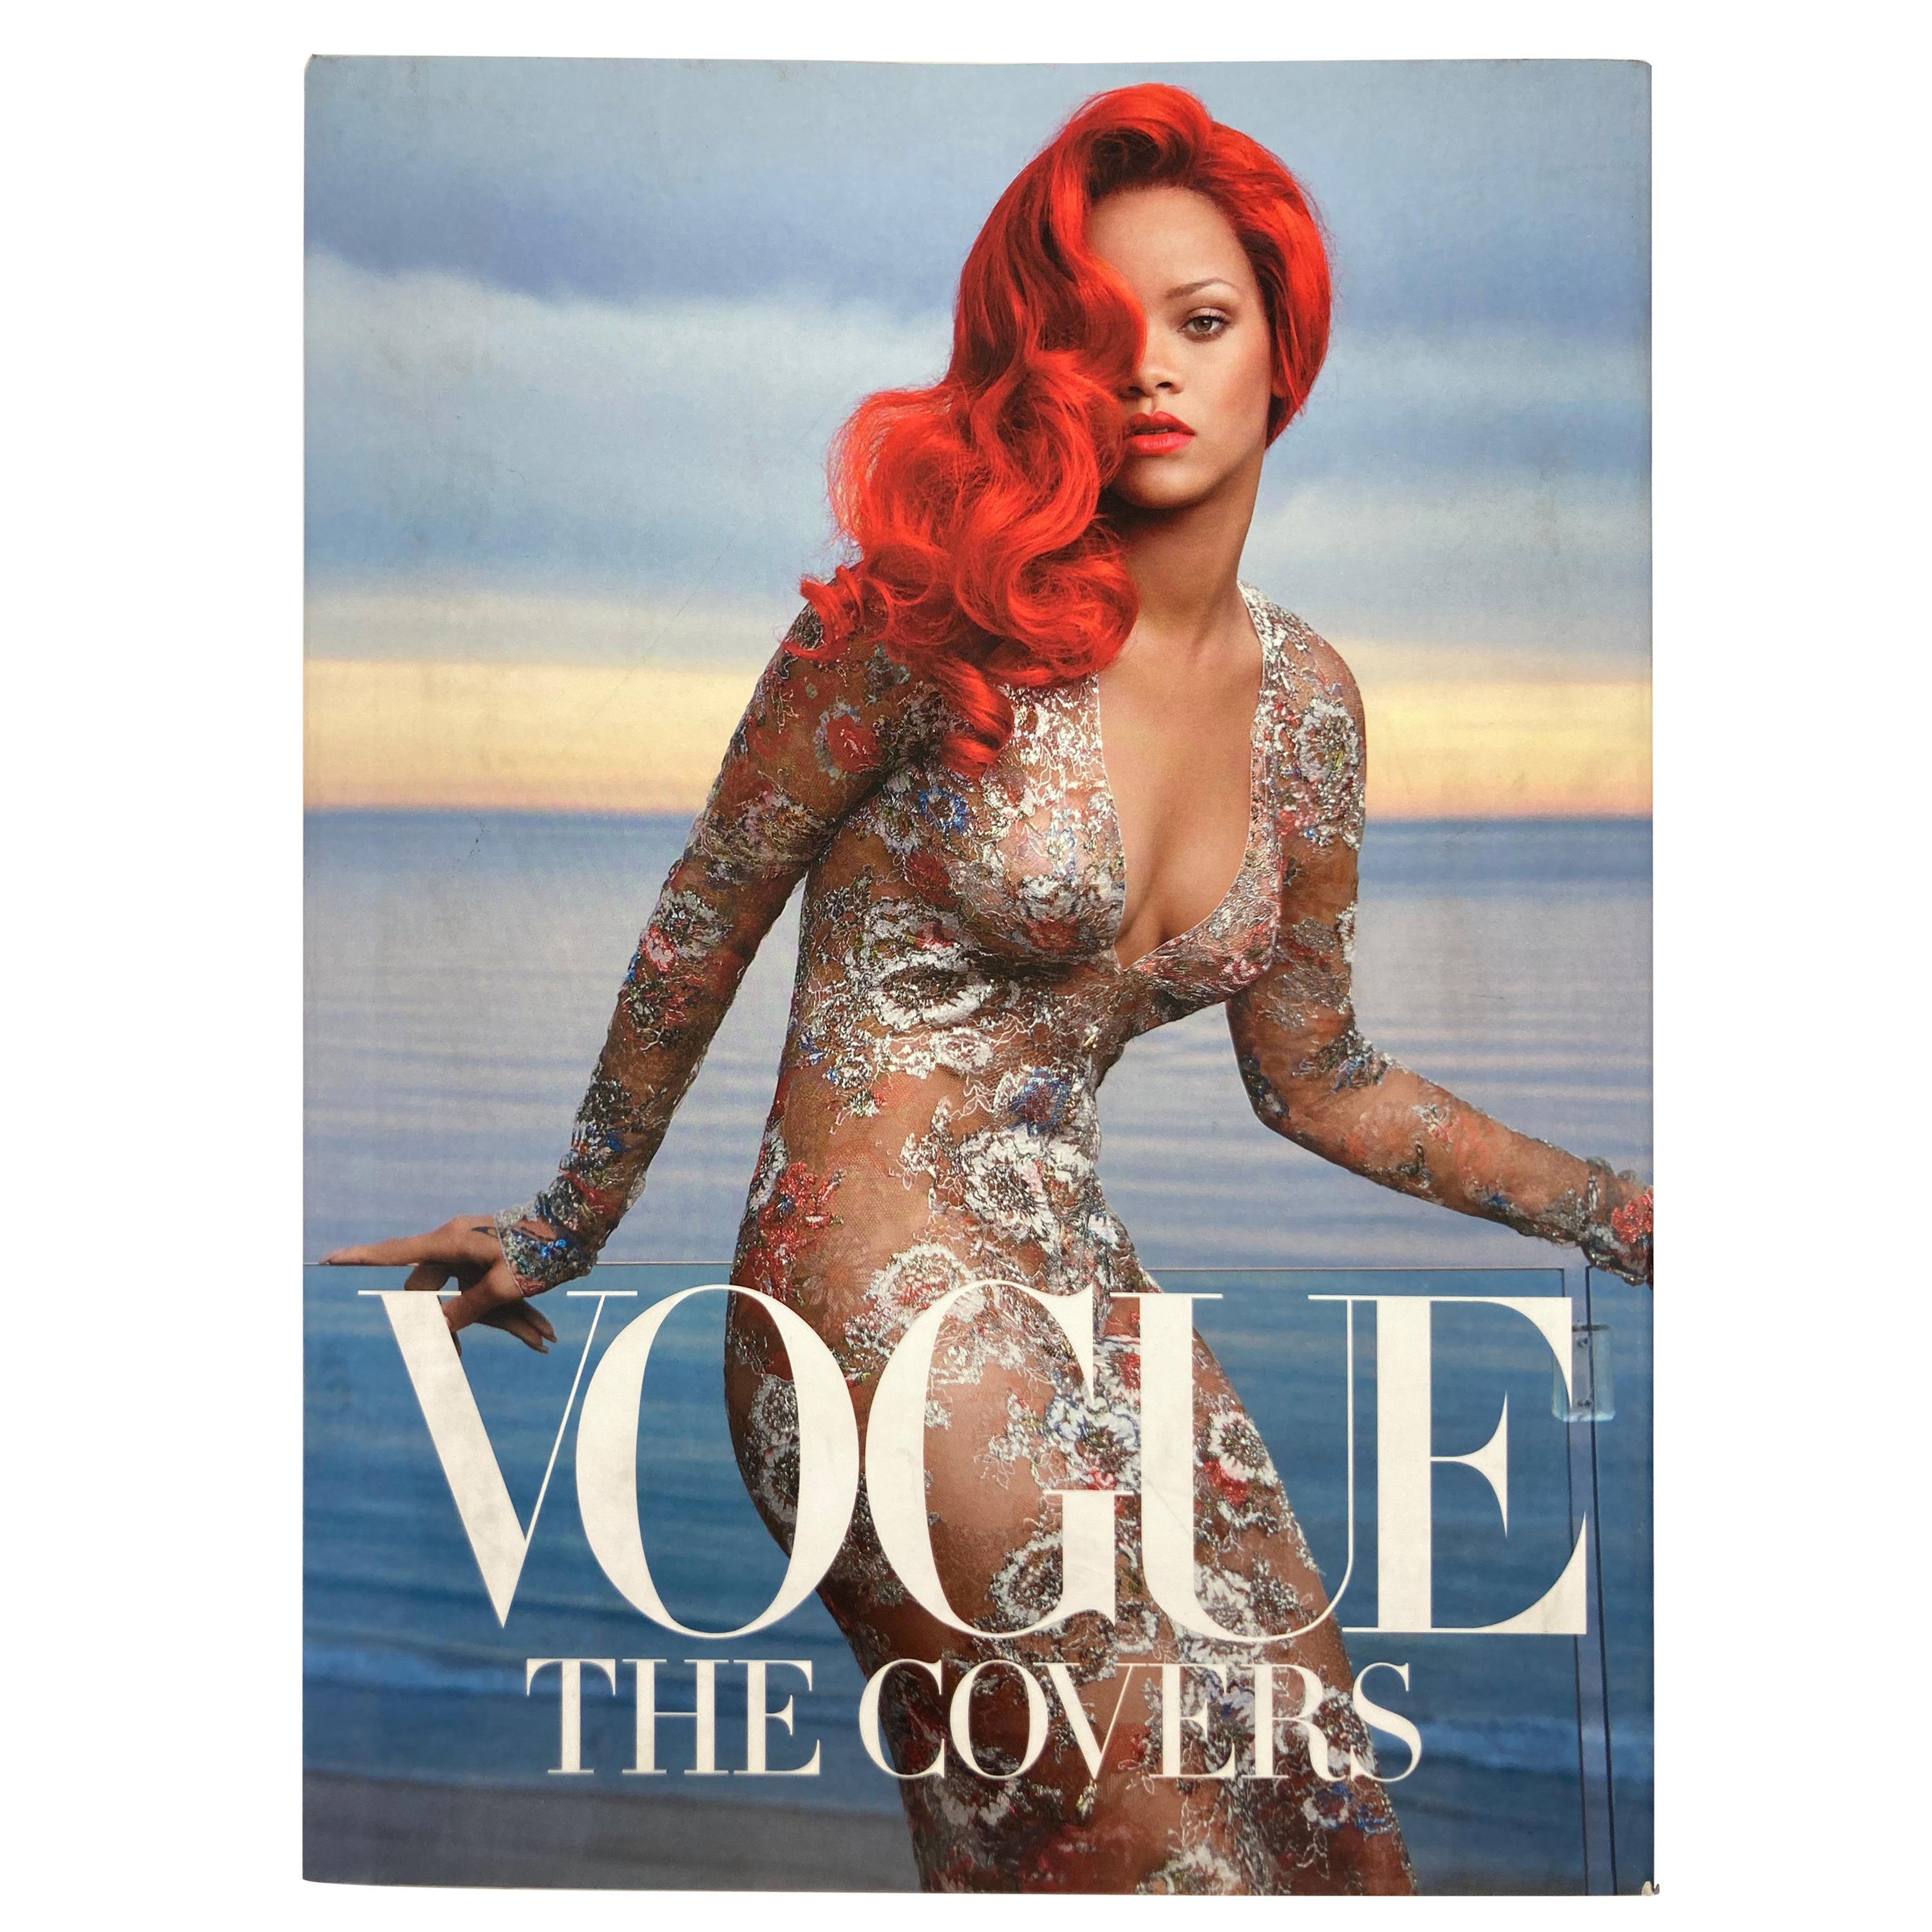 Vogue The Covers Hardcover Coffee Table Book For Sale